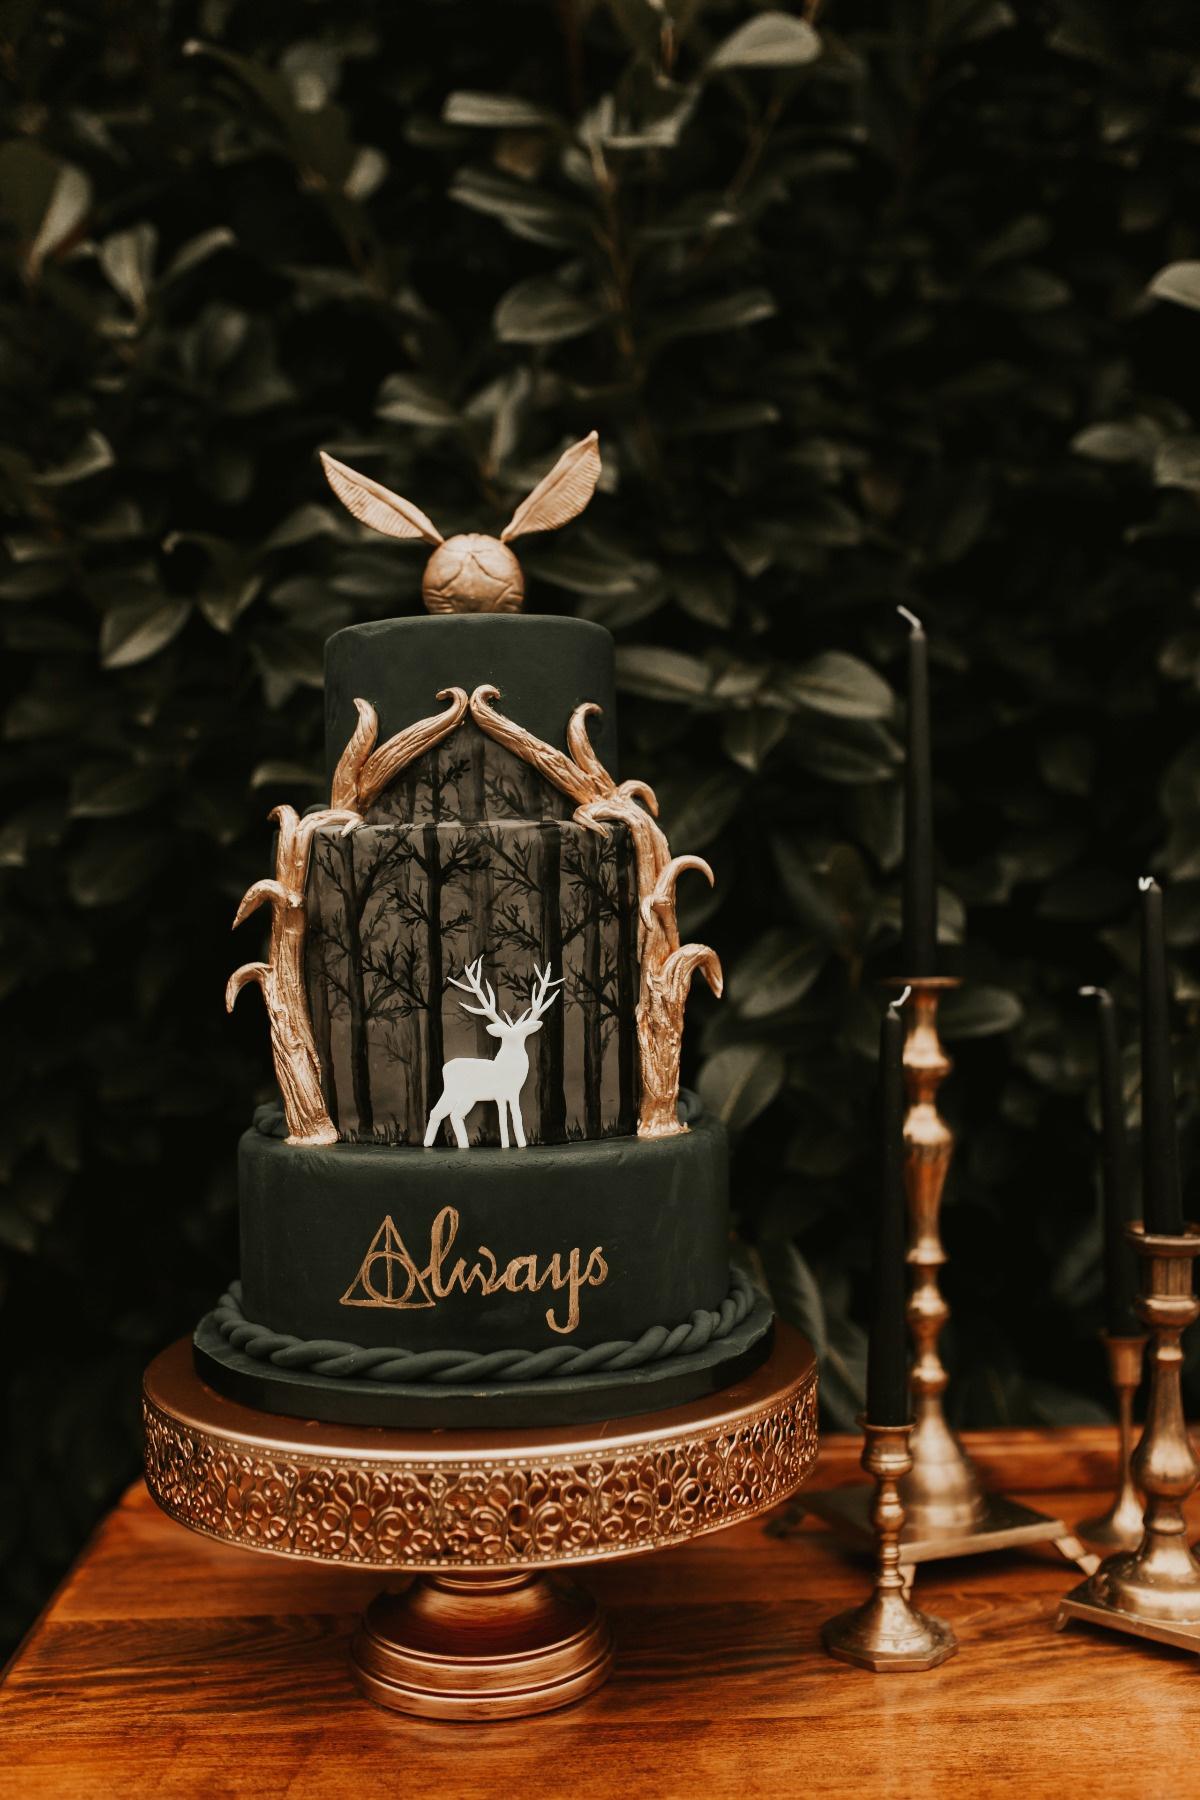 A magical Harry Potter-themed wedding with class tables